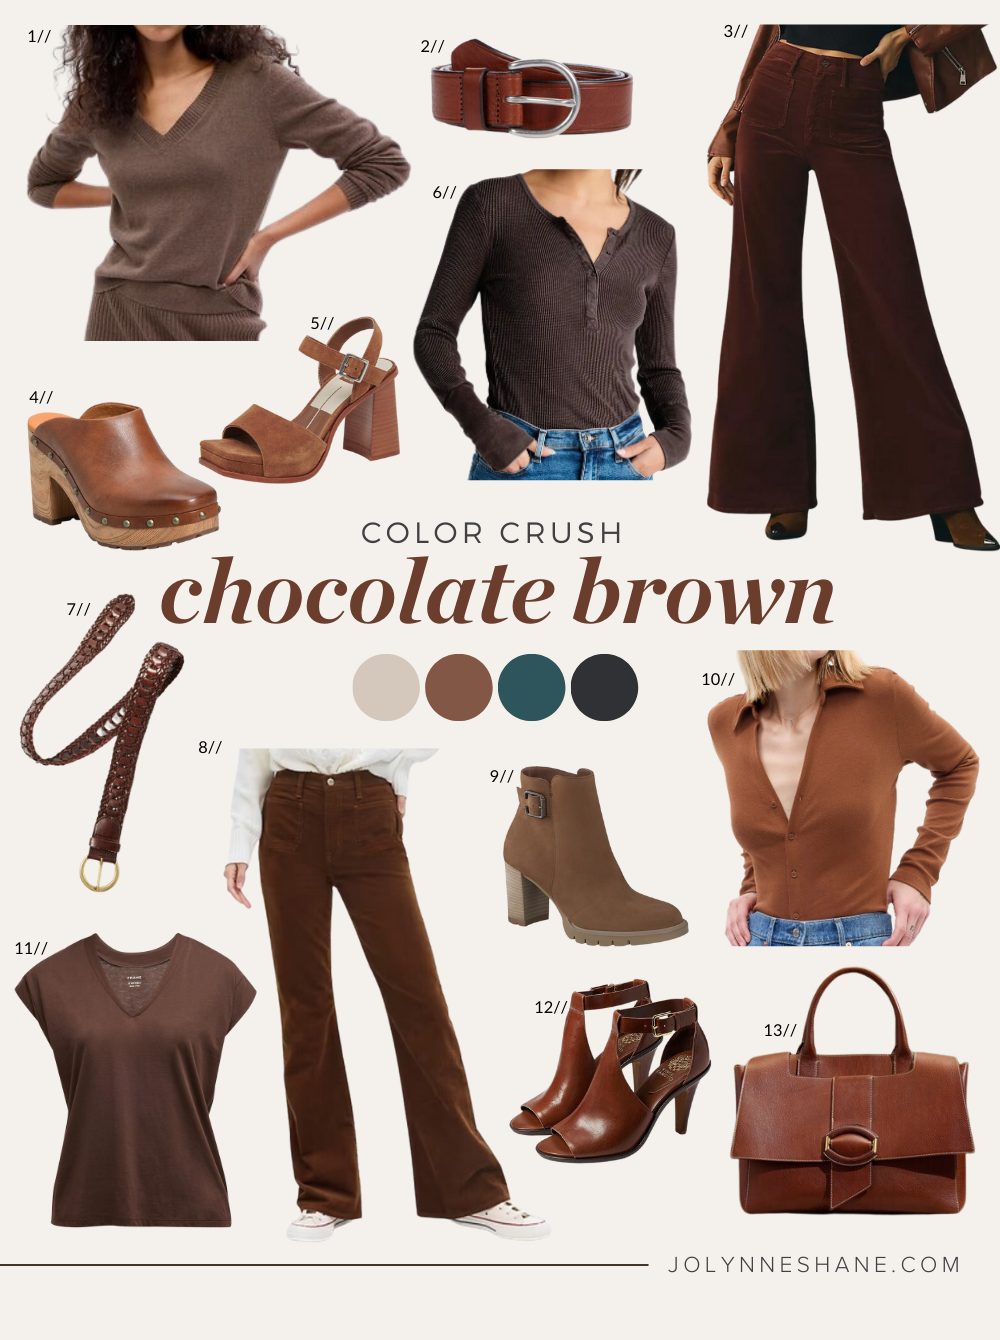 Brown Suede Pumps Fall Outfits (27 ideas & outfits)